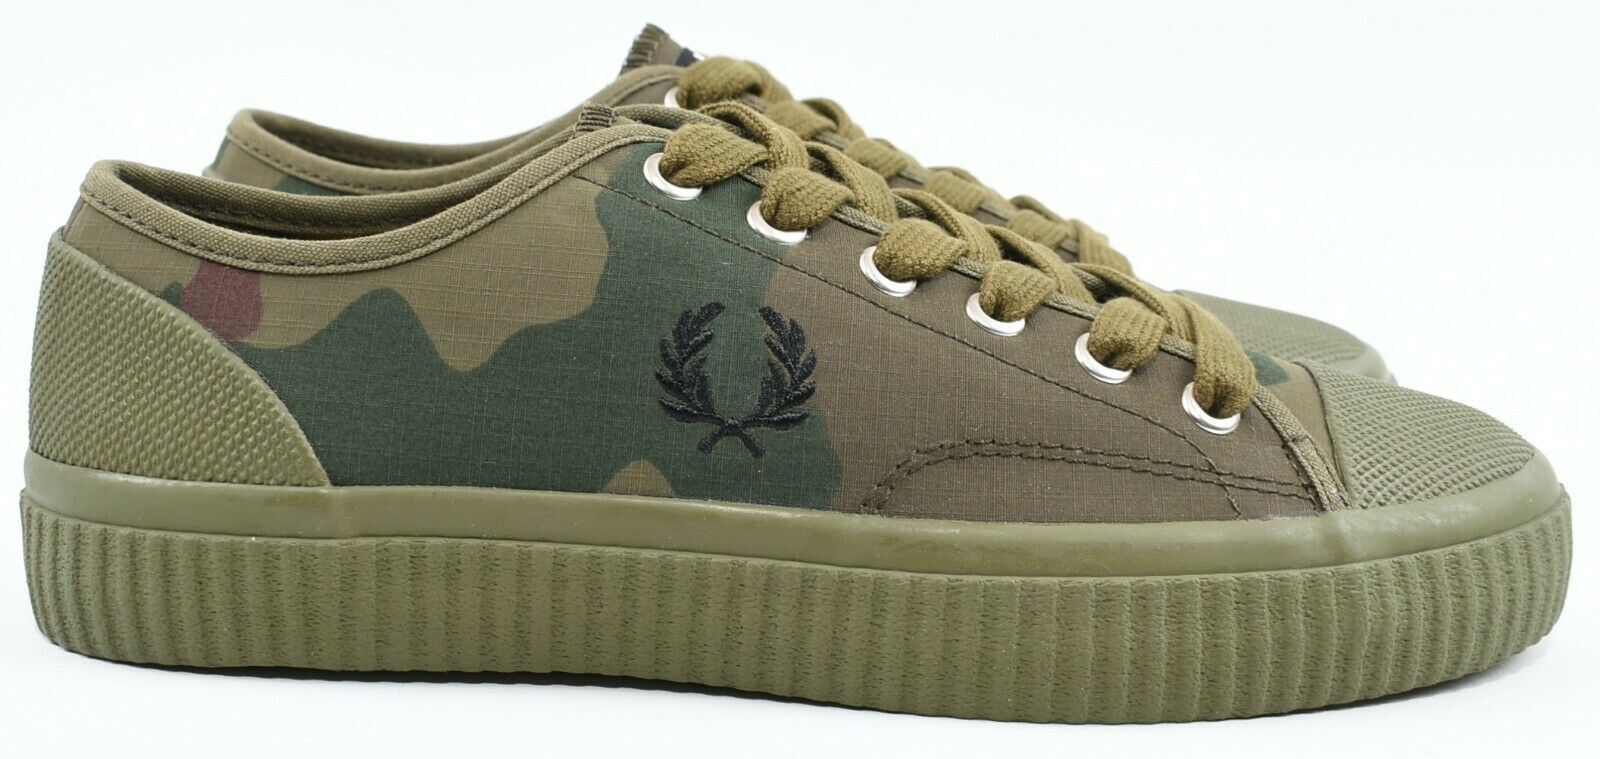 FRED PERRY x ARTIS Women's Khaki Green Camouflage Sneakers Trainers, UK 4